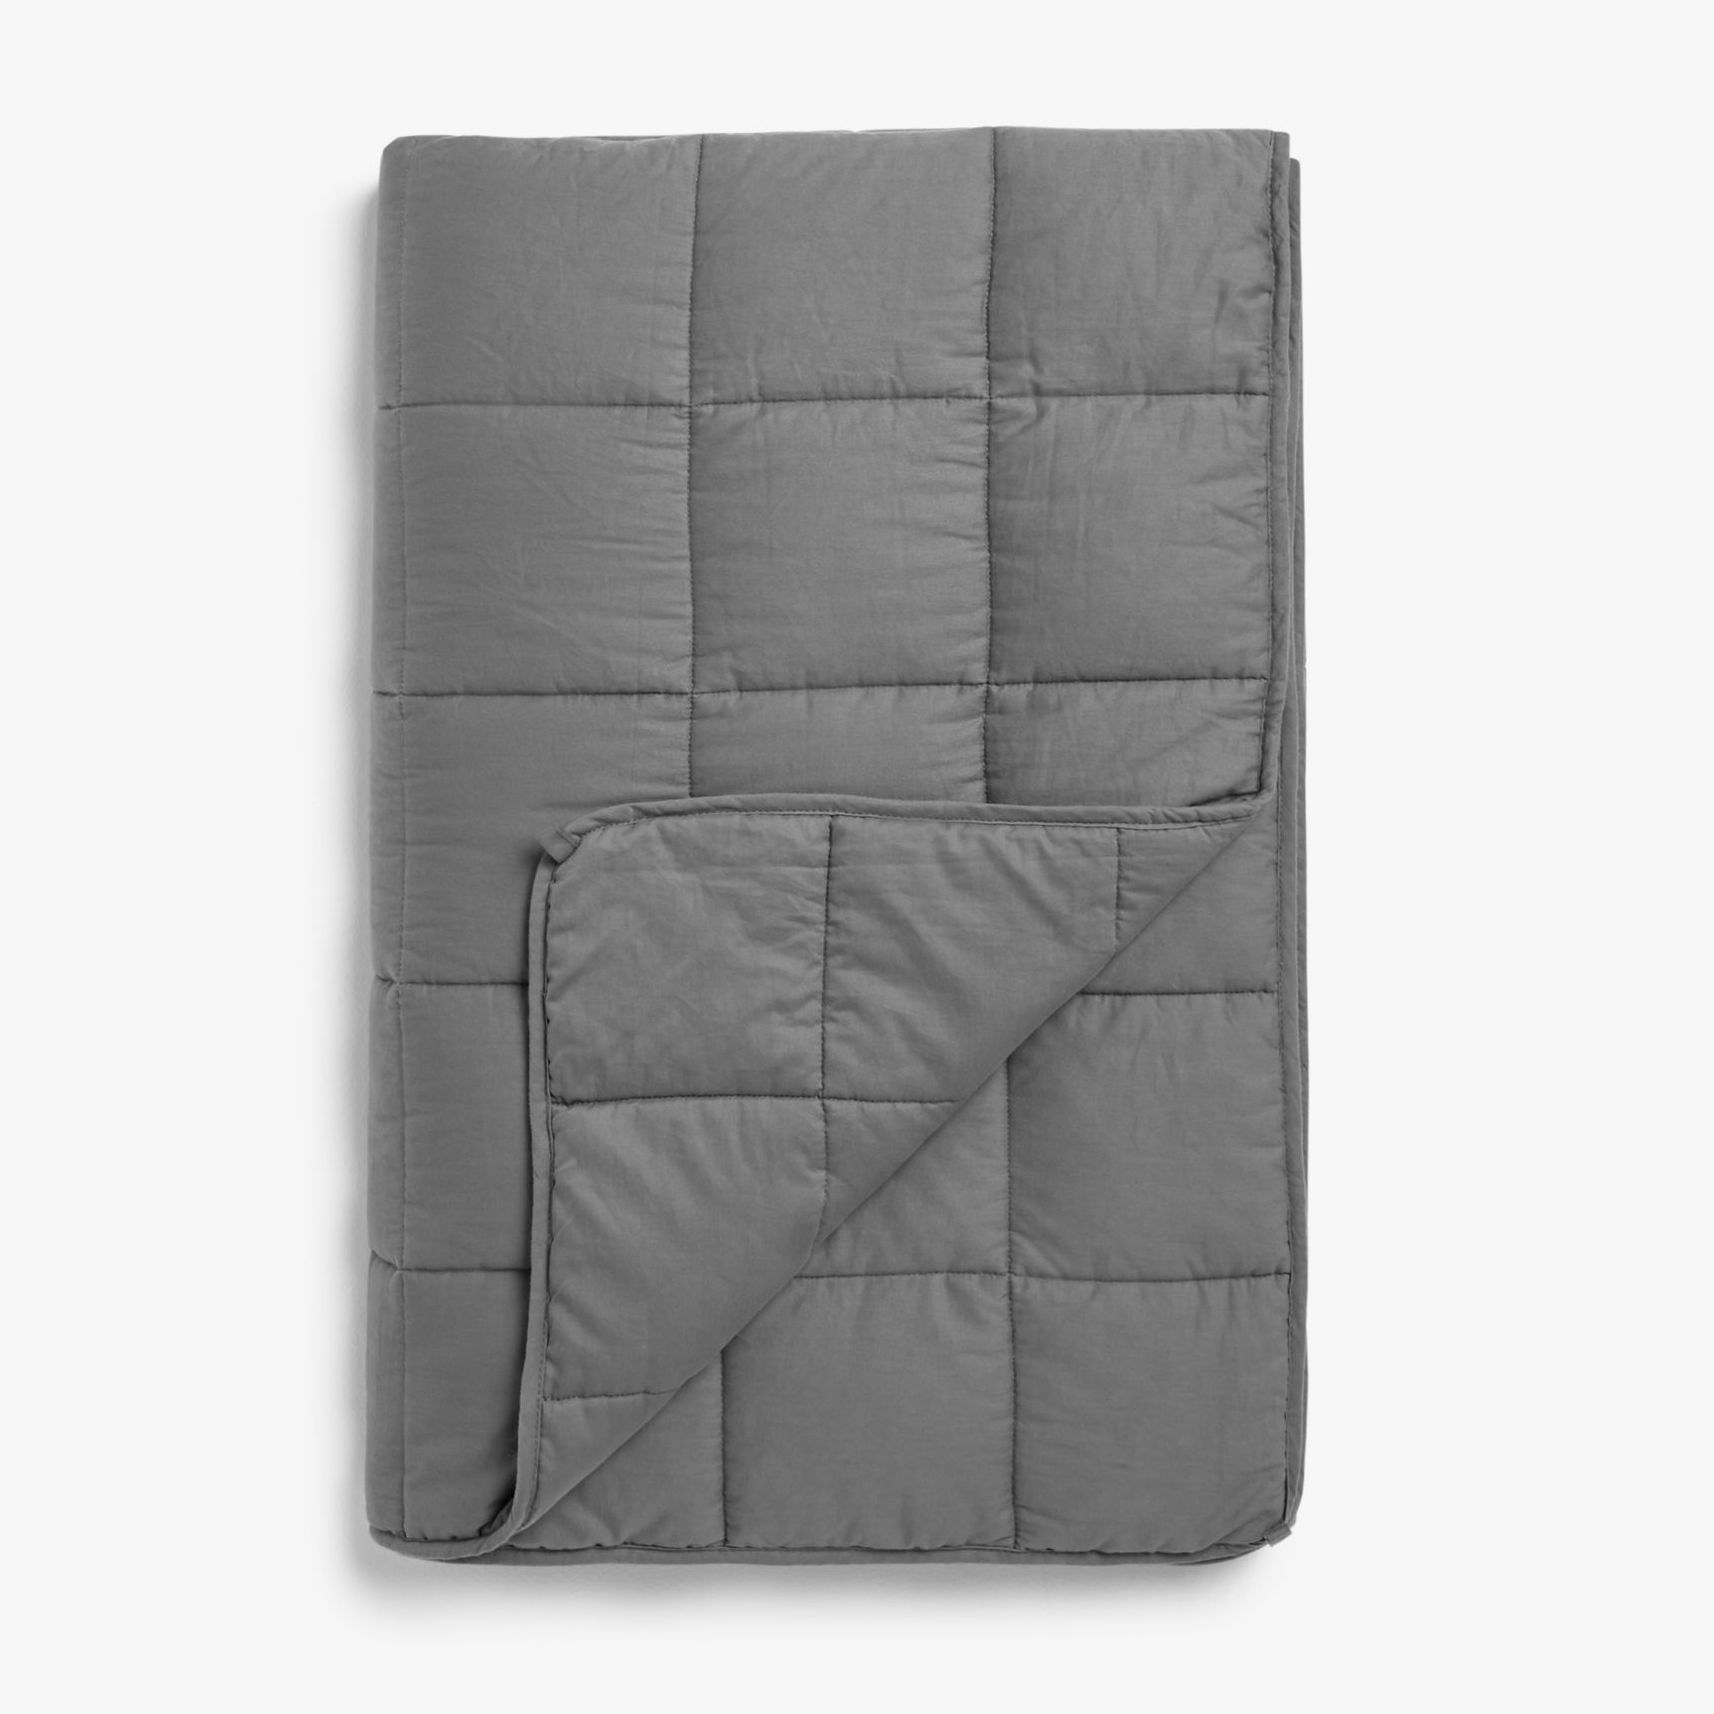 John Lewis Is Selling Weighted Blankets For £60